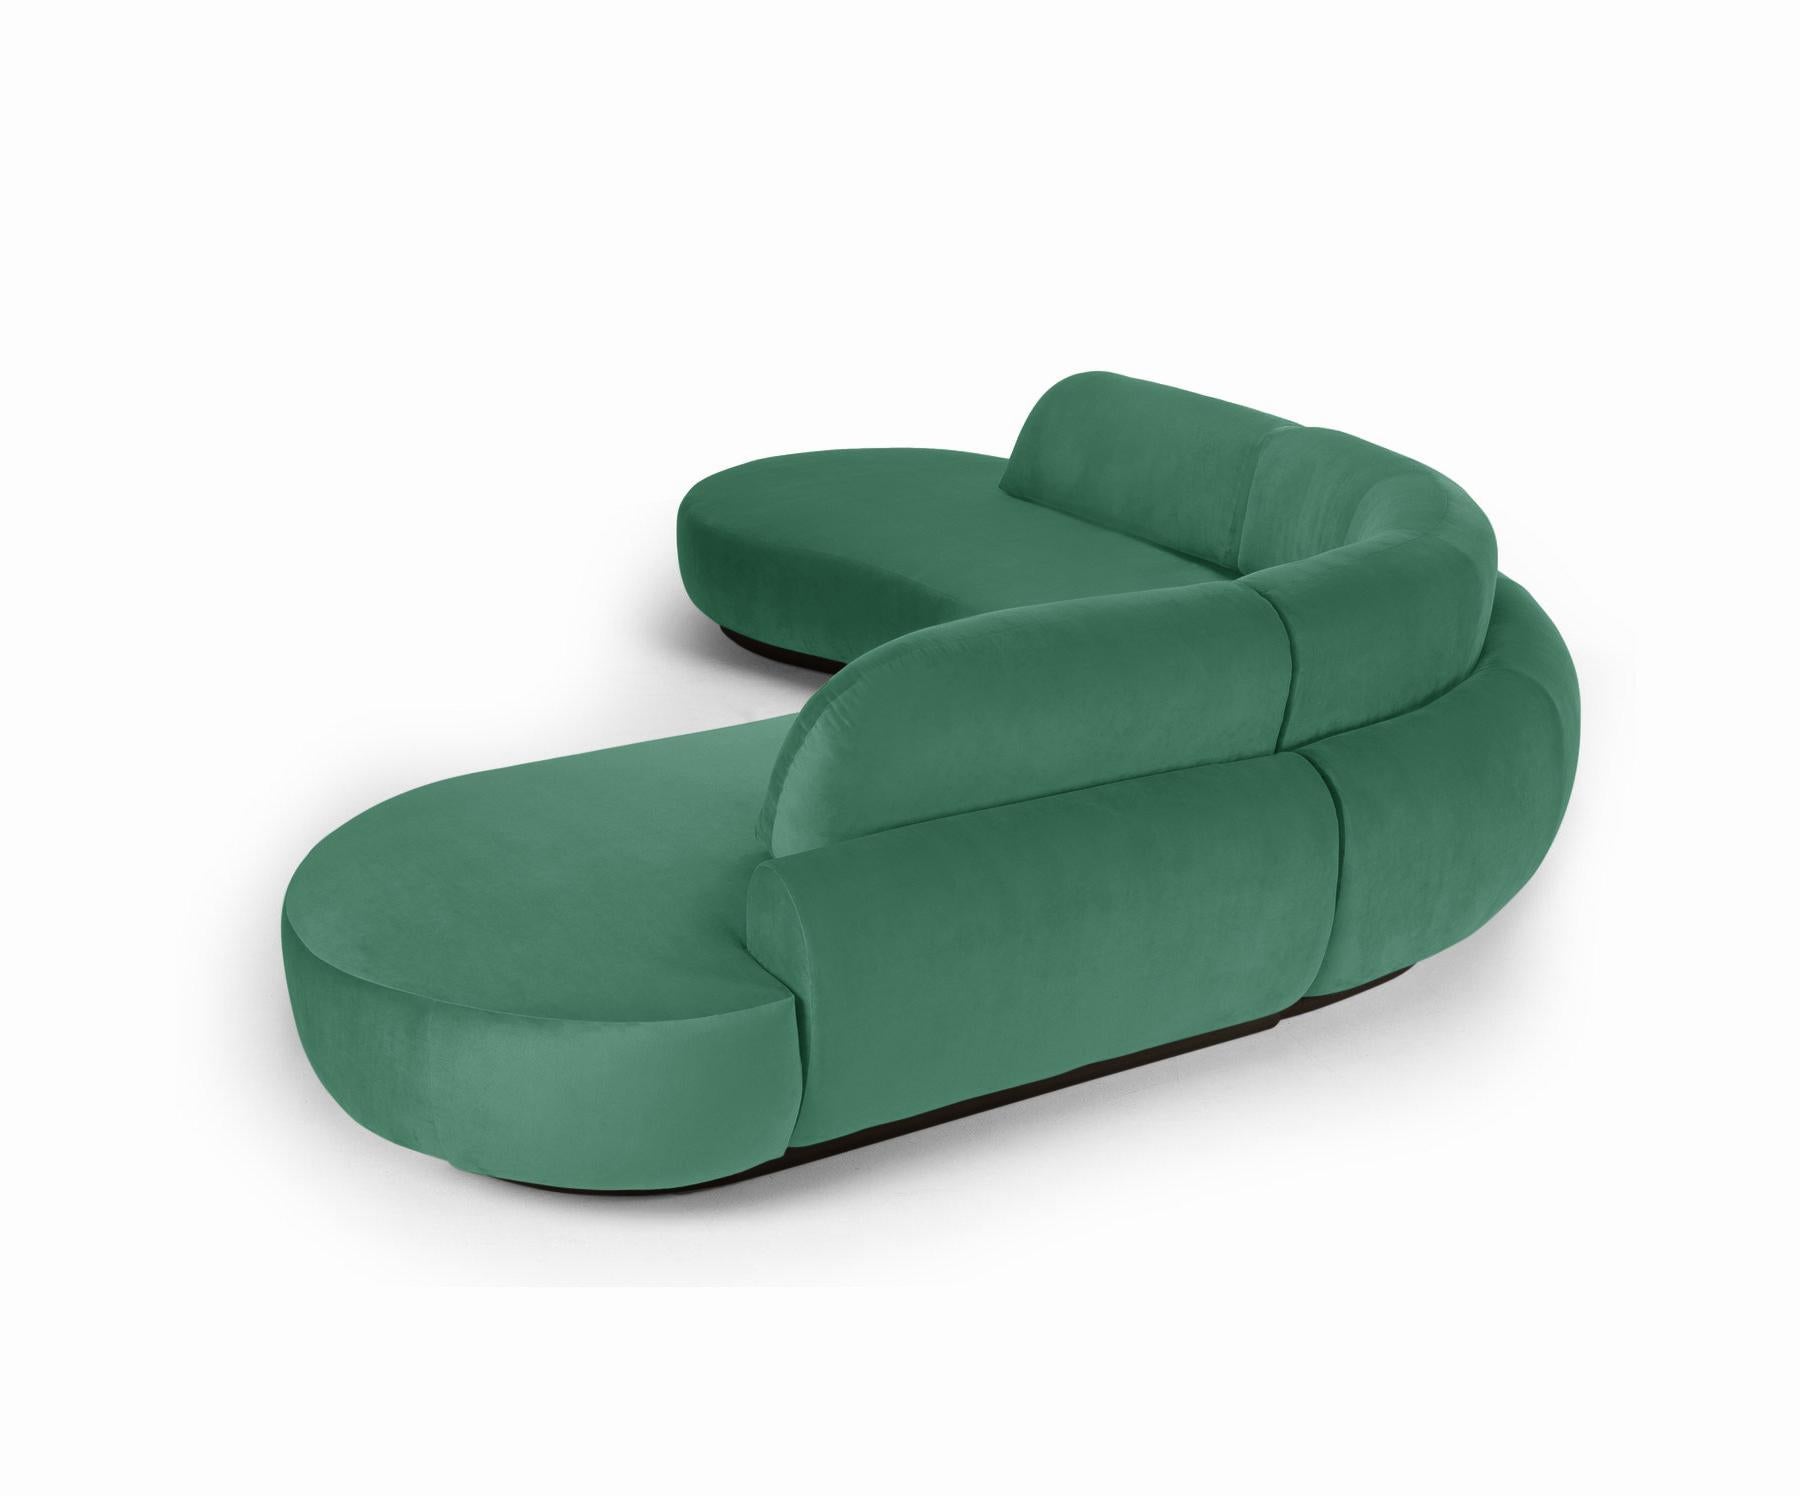 Portuguese Naked Curved Sectional Sofa, 3 Piece with Beech Ash-056-5 and Paris Green For Sale